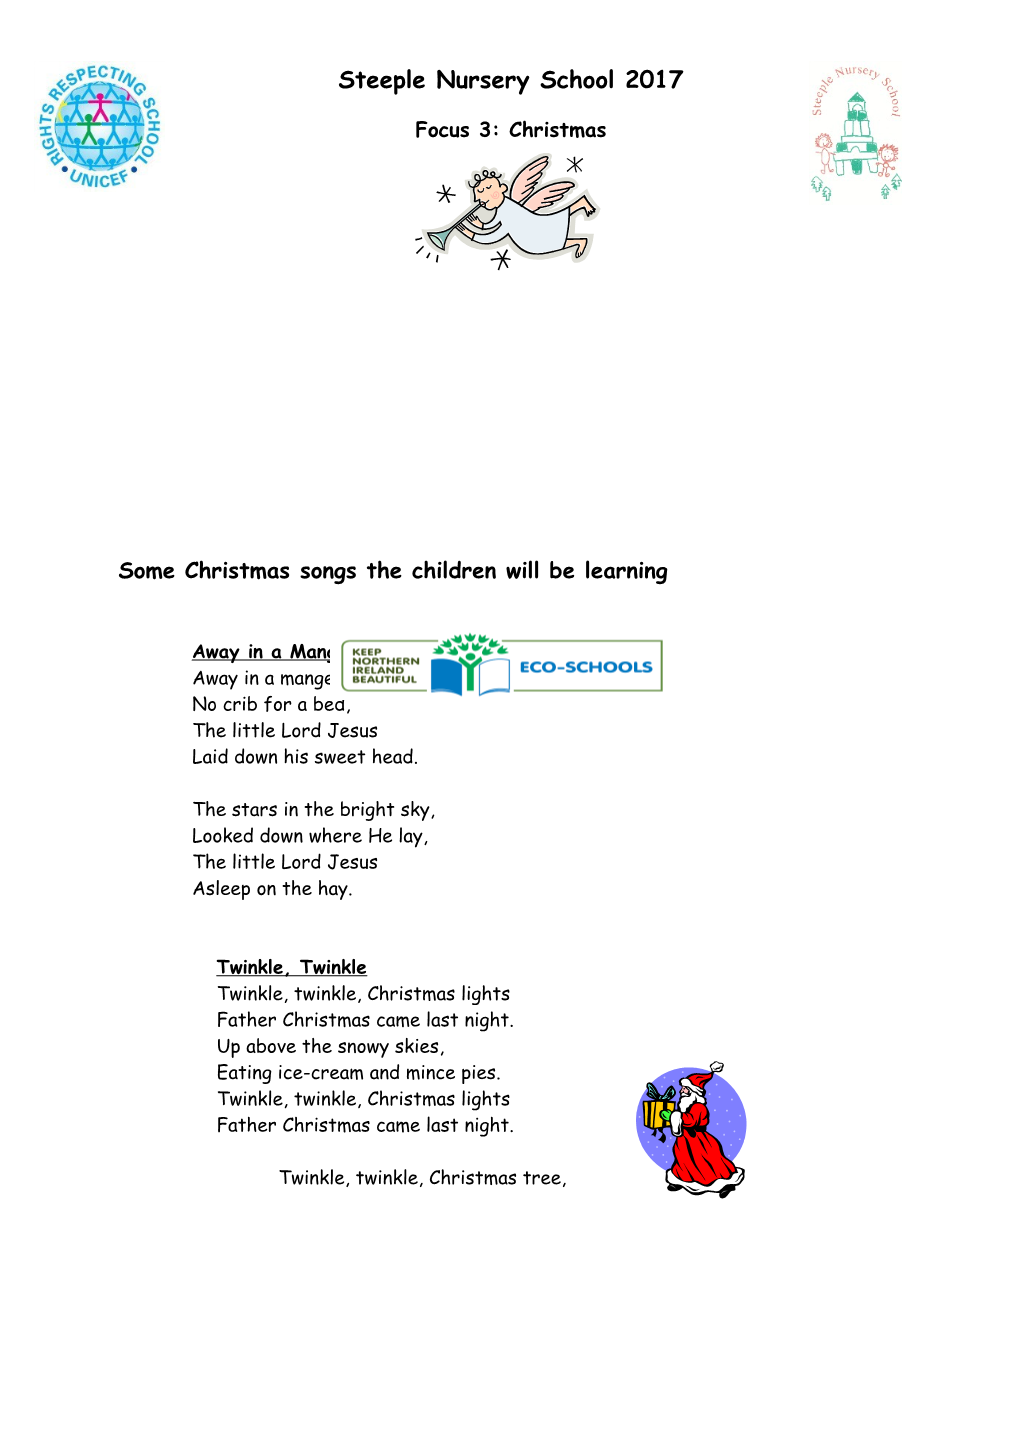 Some Christmas Songs the Children Will Be Learning